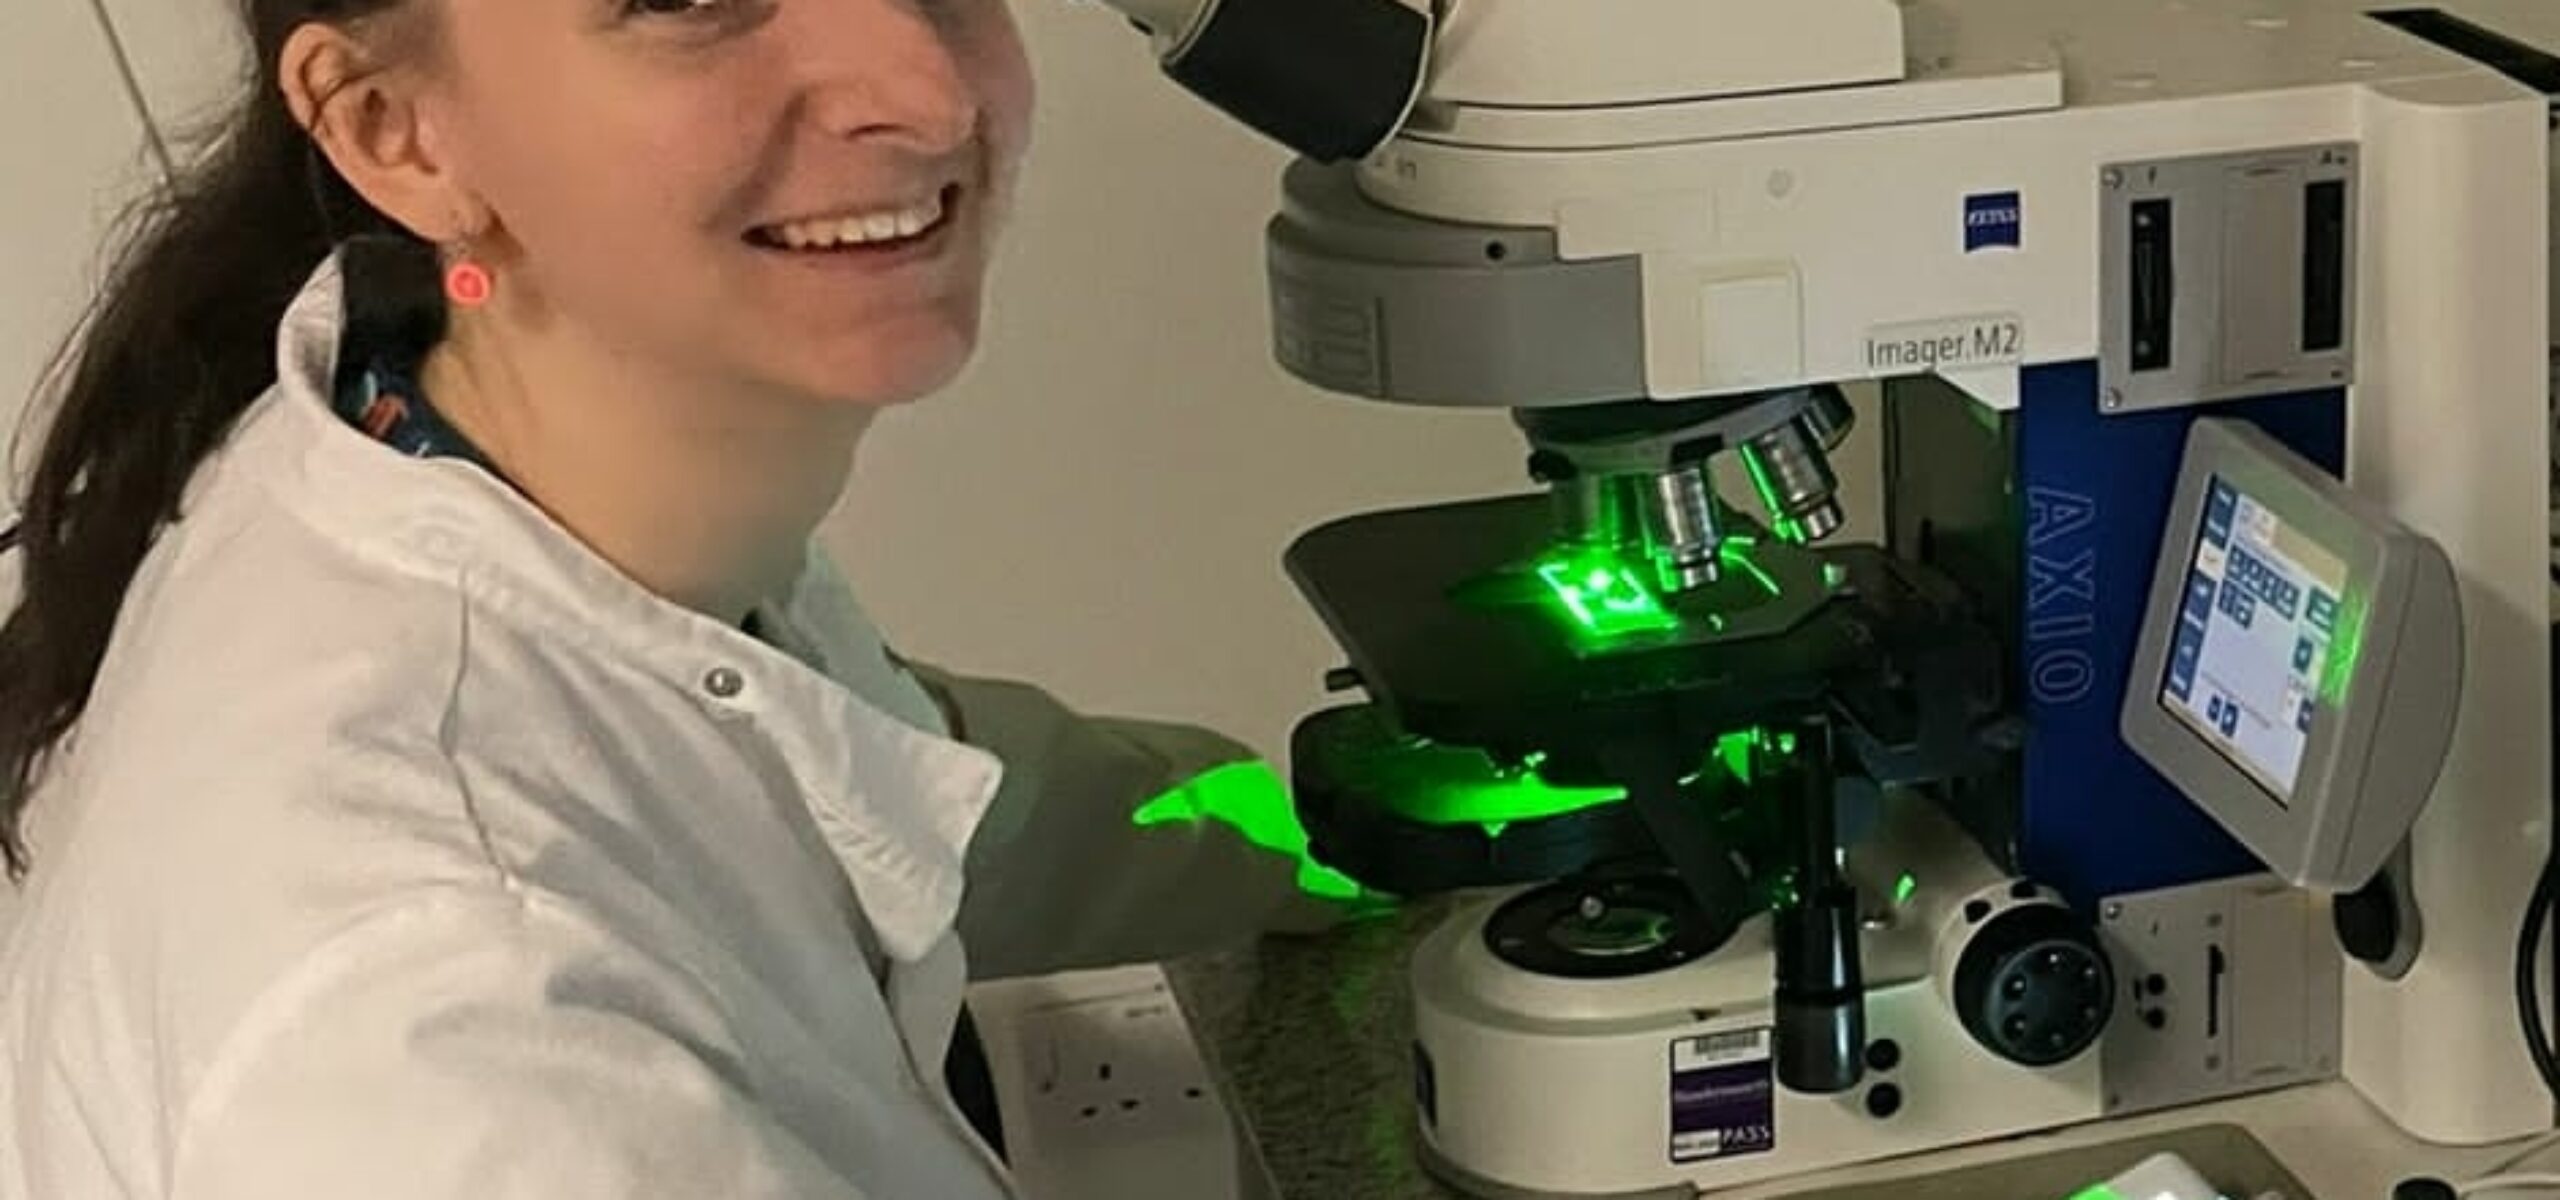 Charlotte Mellor looking at the camera, with a microscope and computer screen in the background.